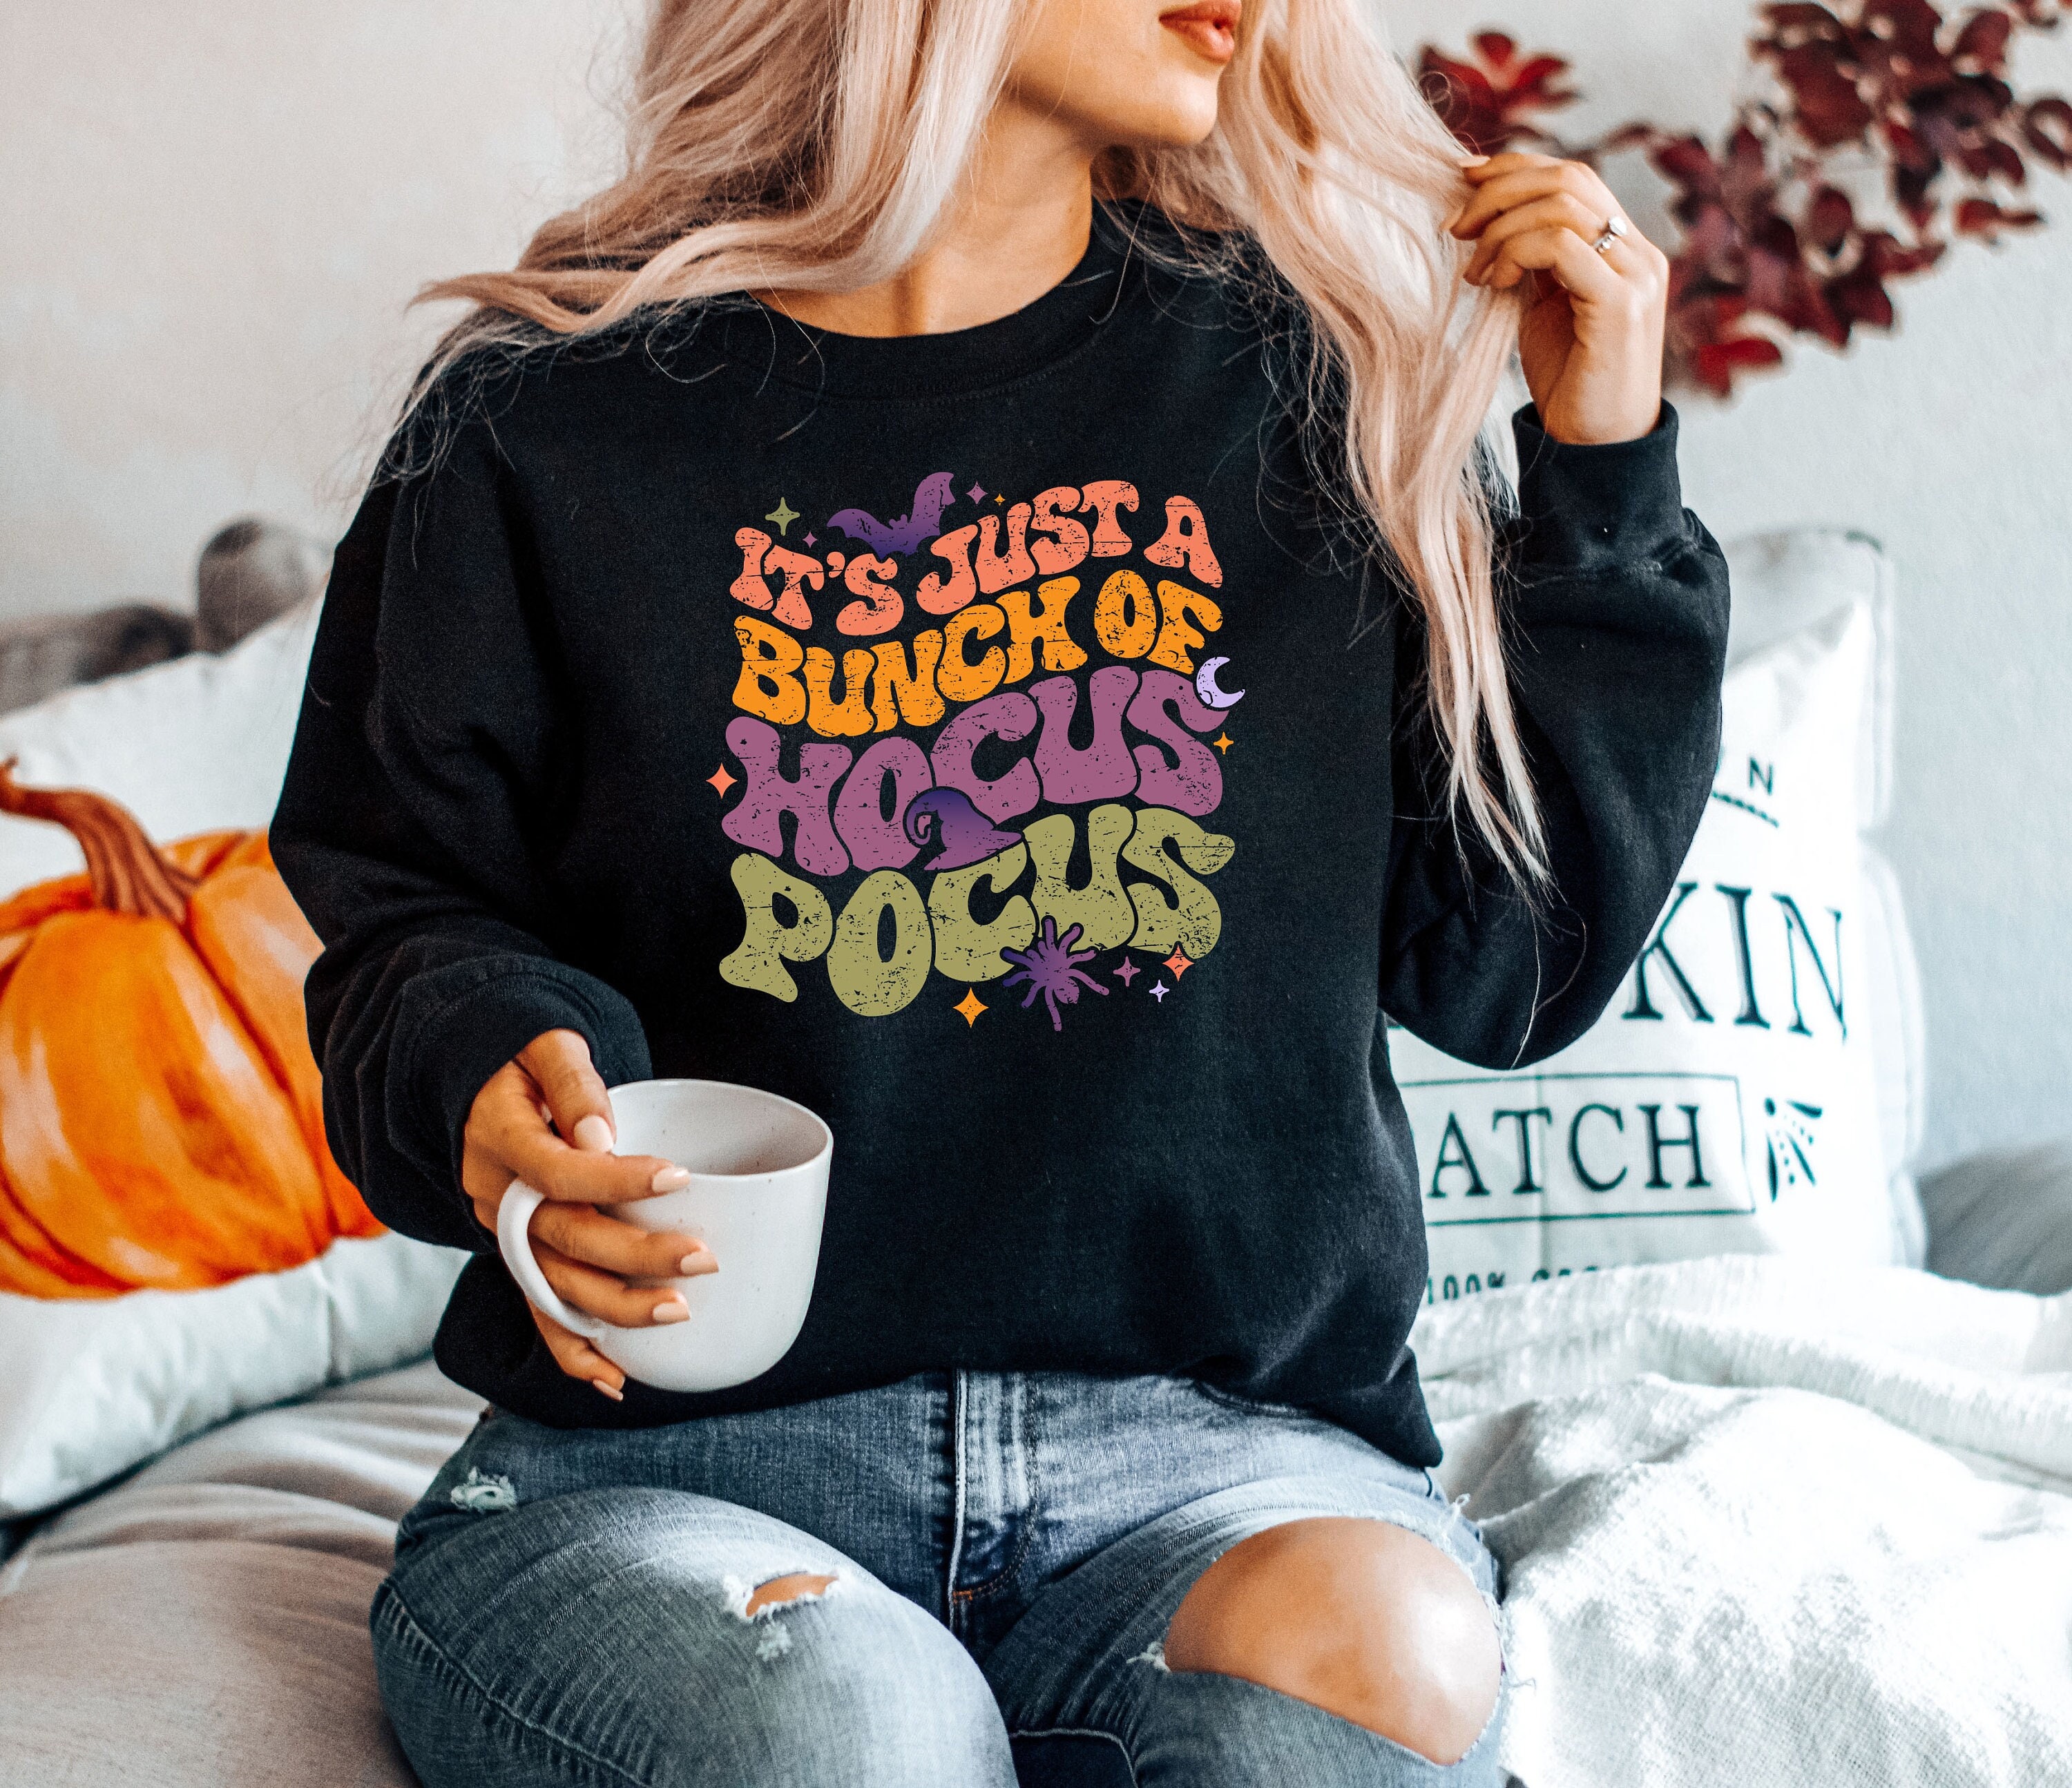 Its Just A Buhch of Hocus Pocus Sweatshirt Women Halloween sweater, Hocus Pocus sweatshirt, Sanderson Sisters sweater, Halloween Party gifts